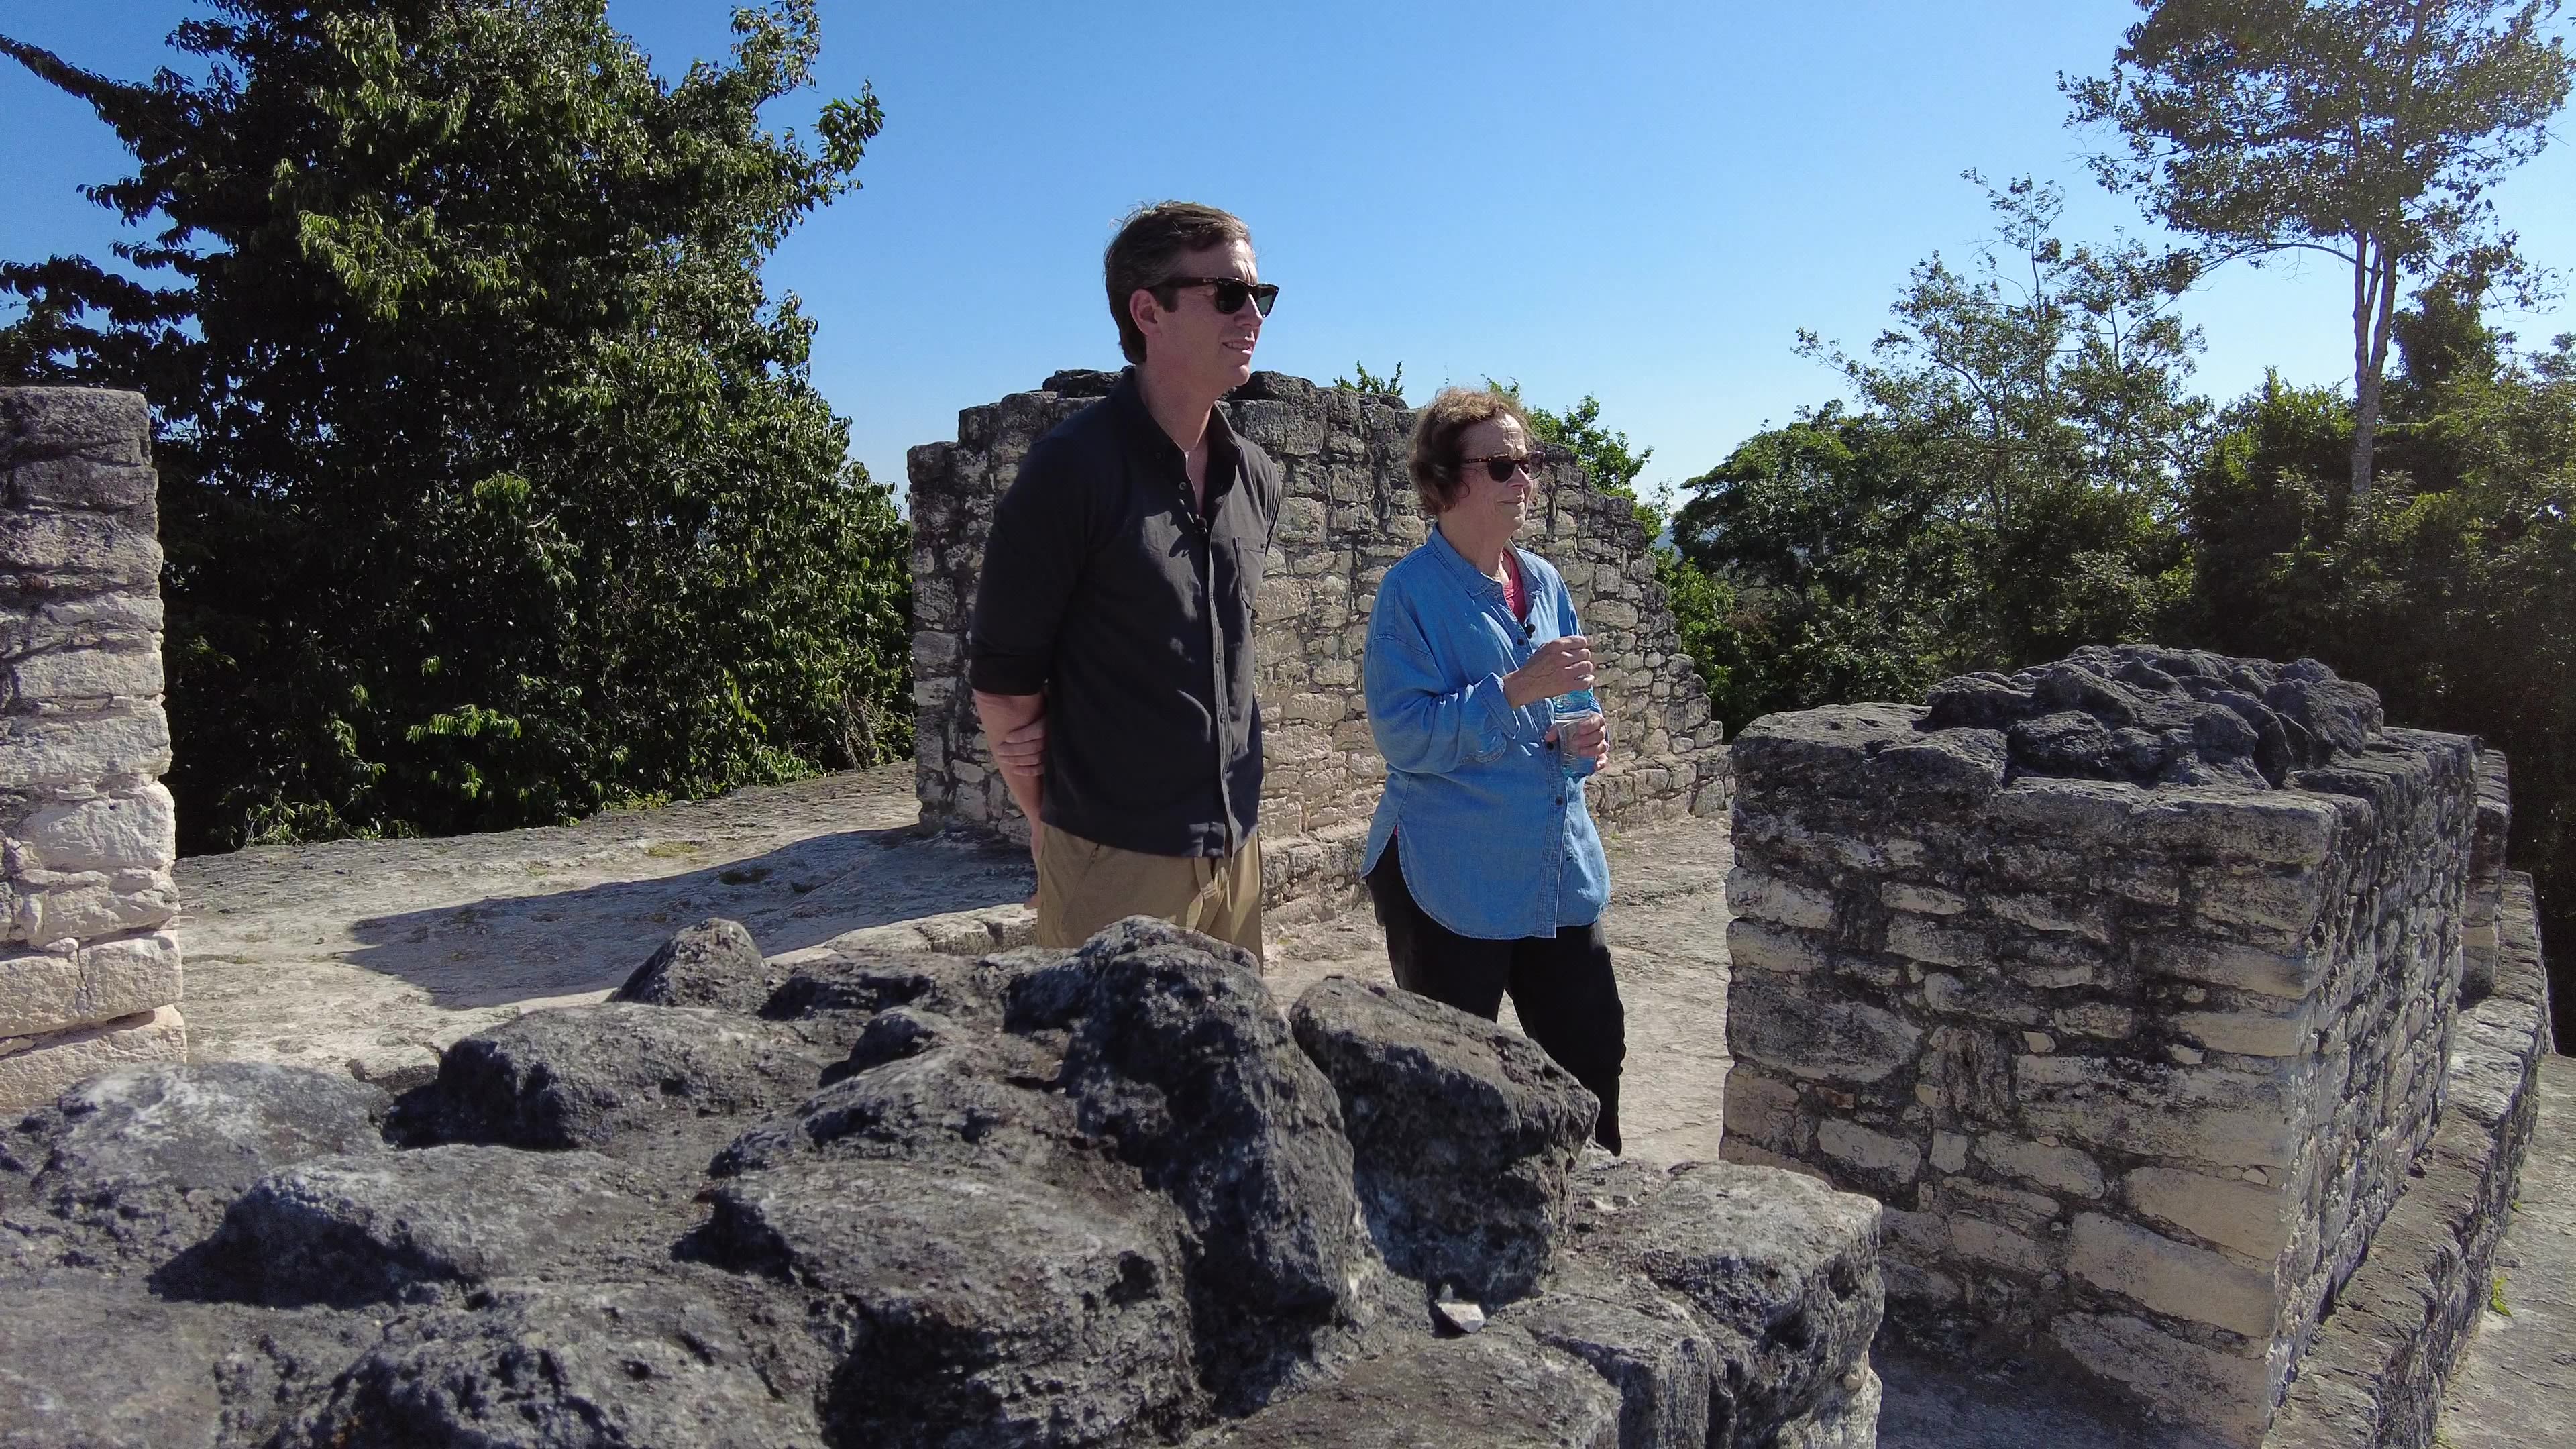 Man in black jacket standing with woman in blue jacket in archaeological site.